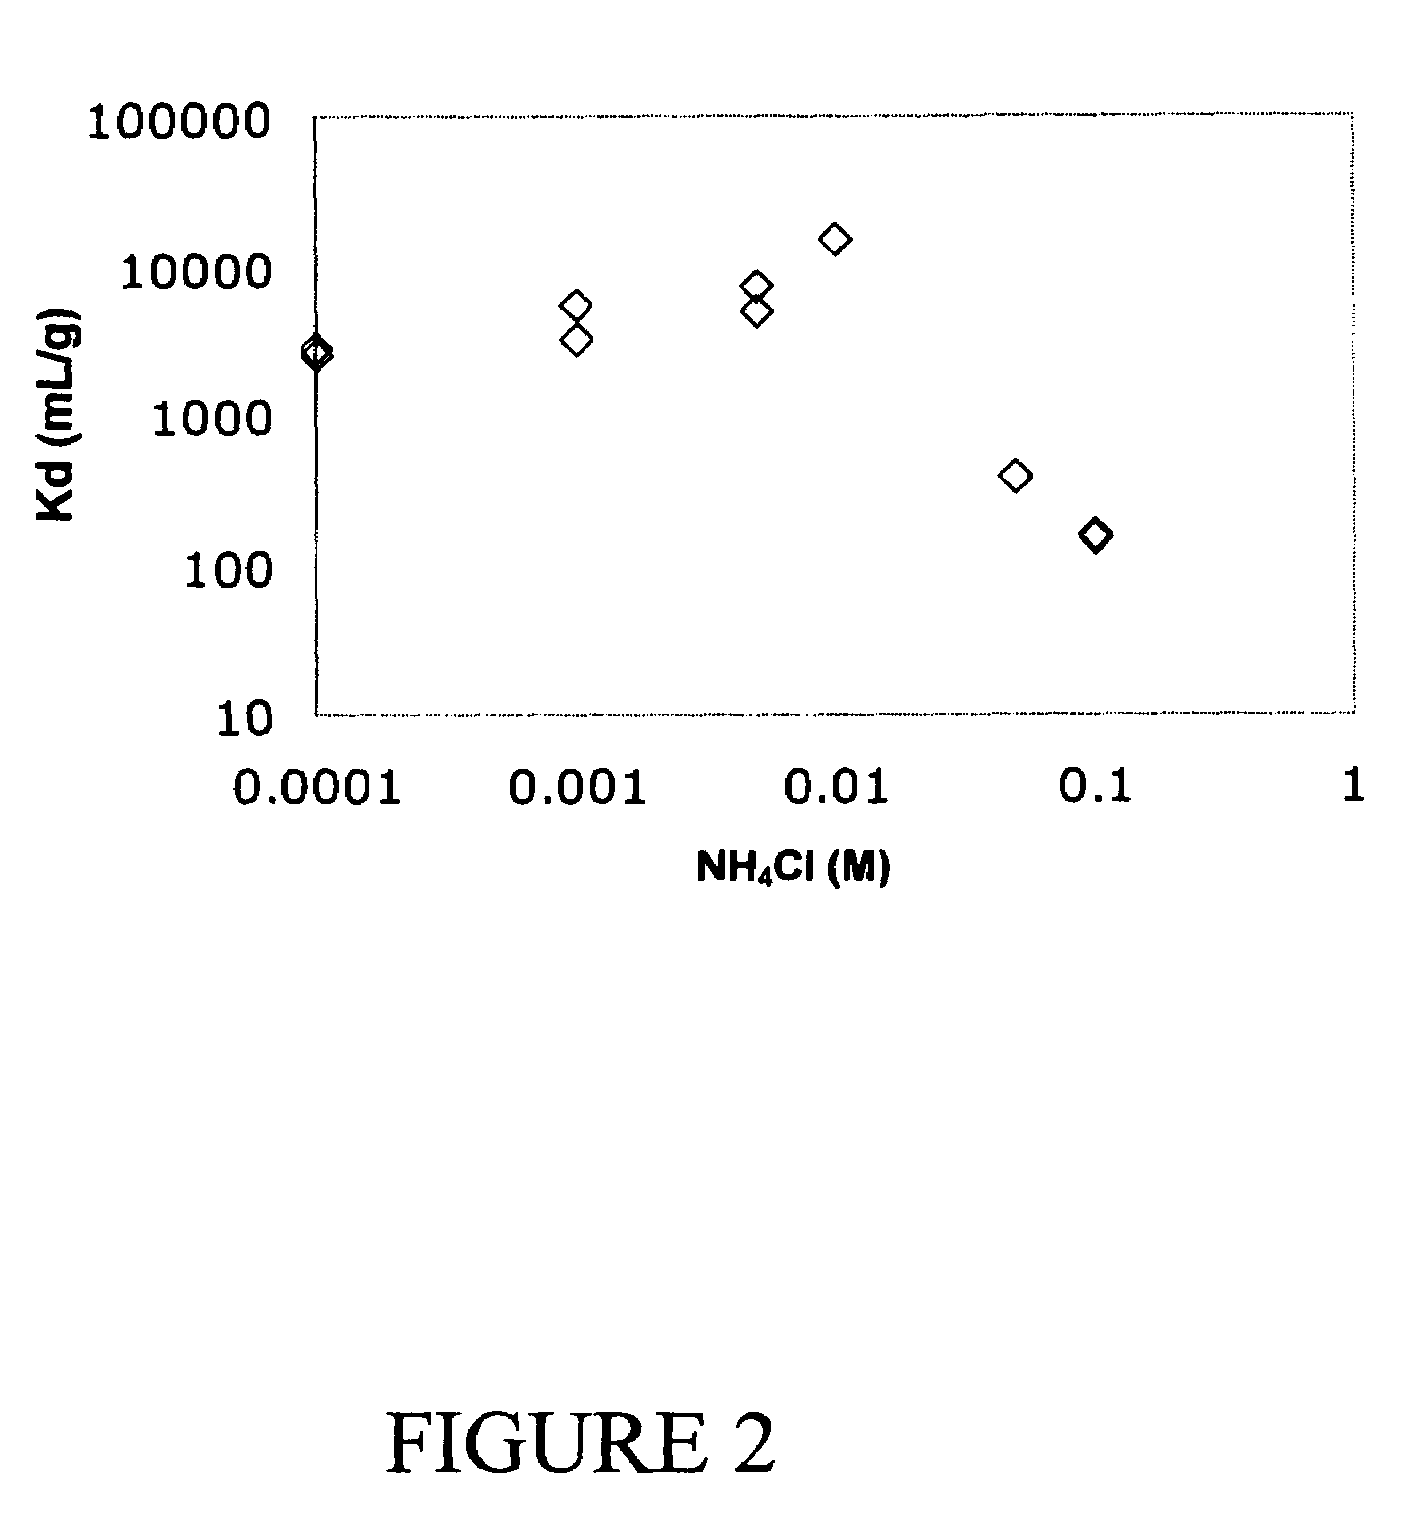 Composition suitable for decontaminating a porous surface contaminated with cesium